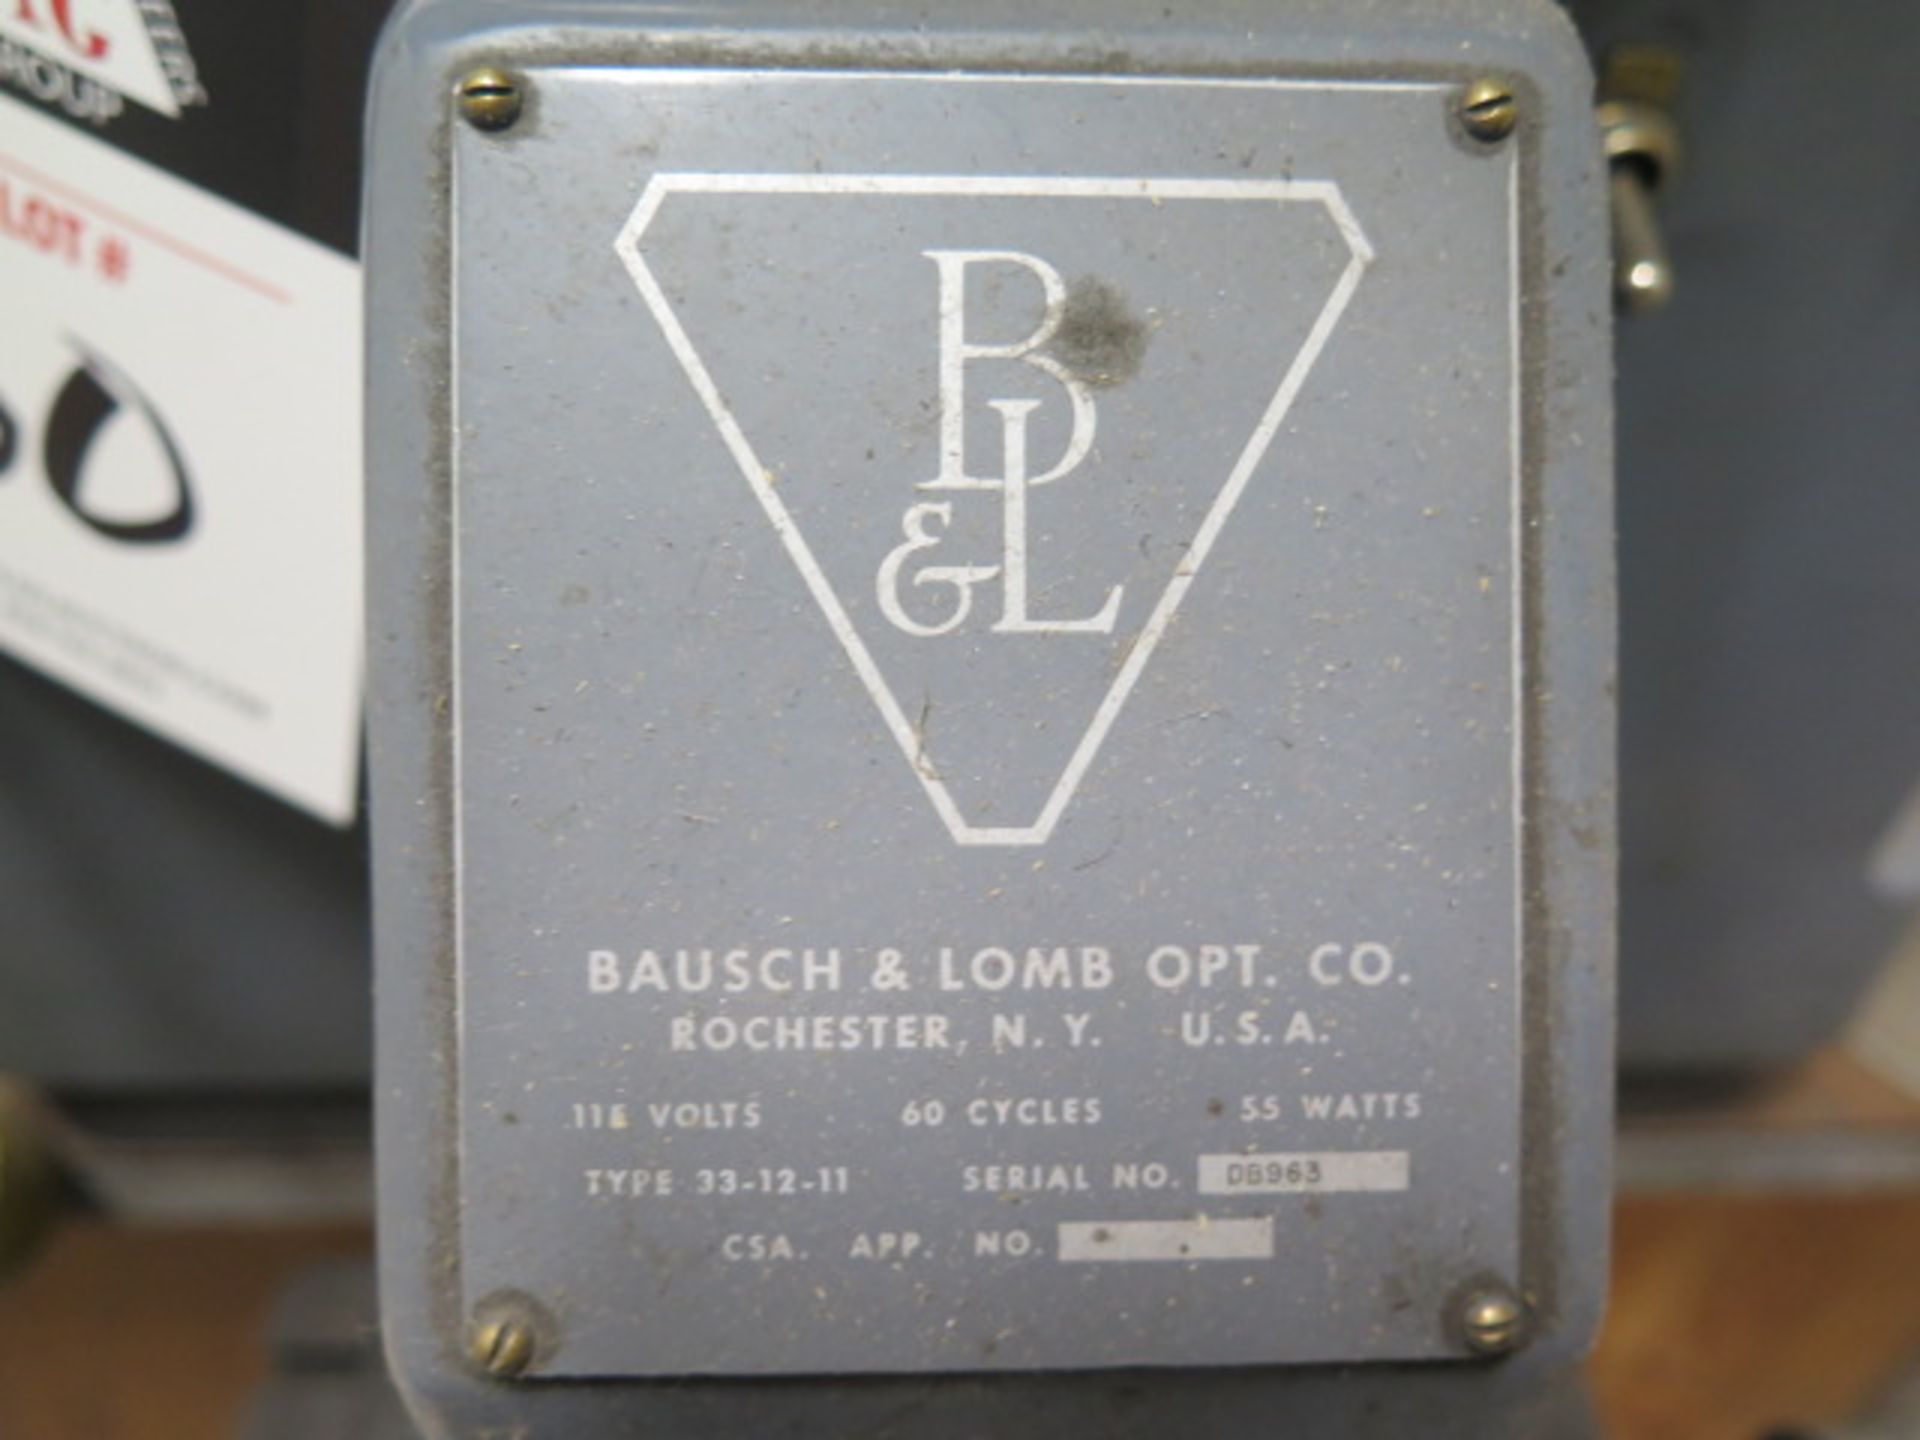 Bausch & Lomb 10” Optical Comparator (SOLD AS-IS - NO WARRANTY) - Image 6 of 6